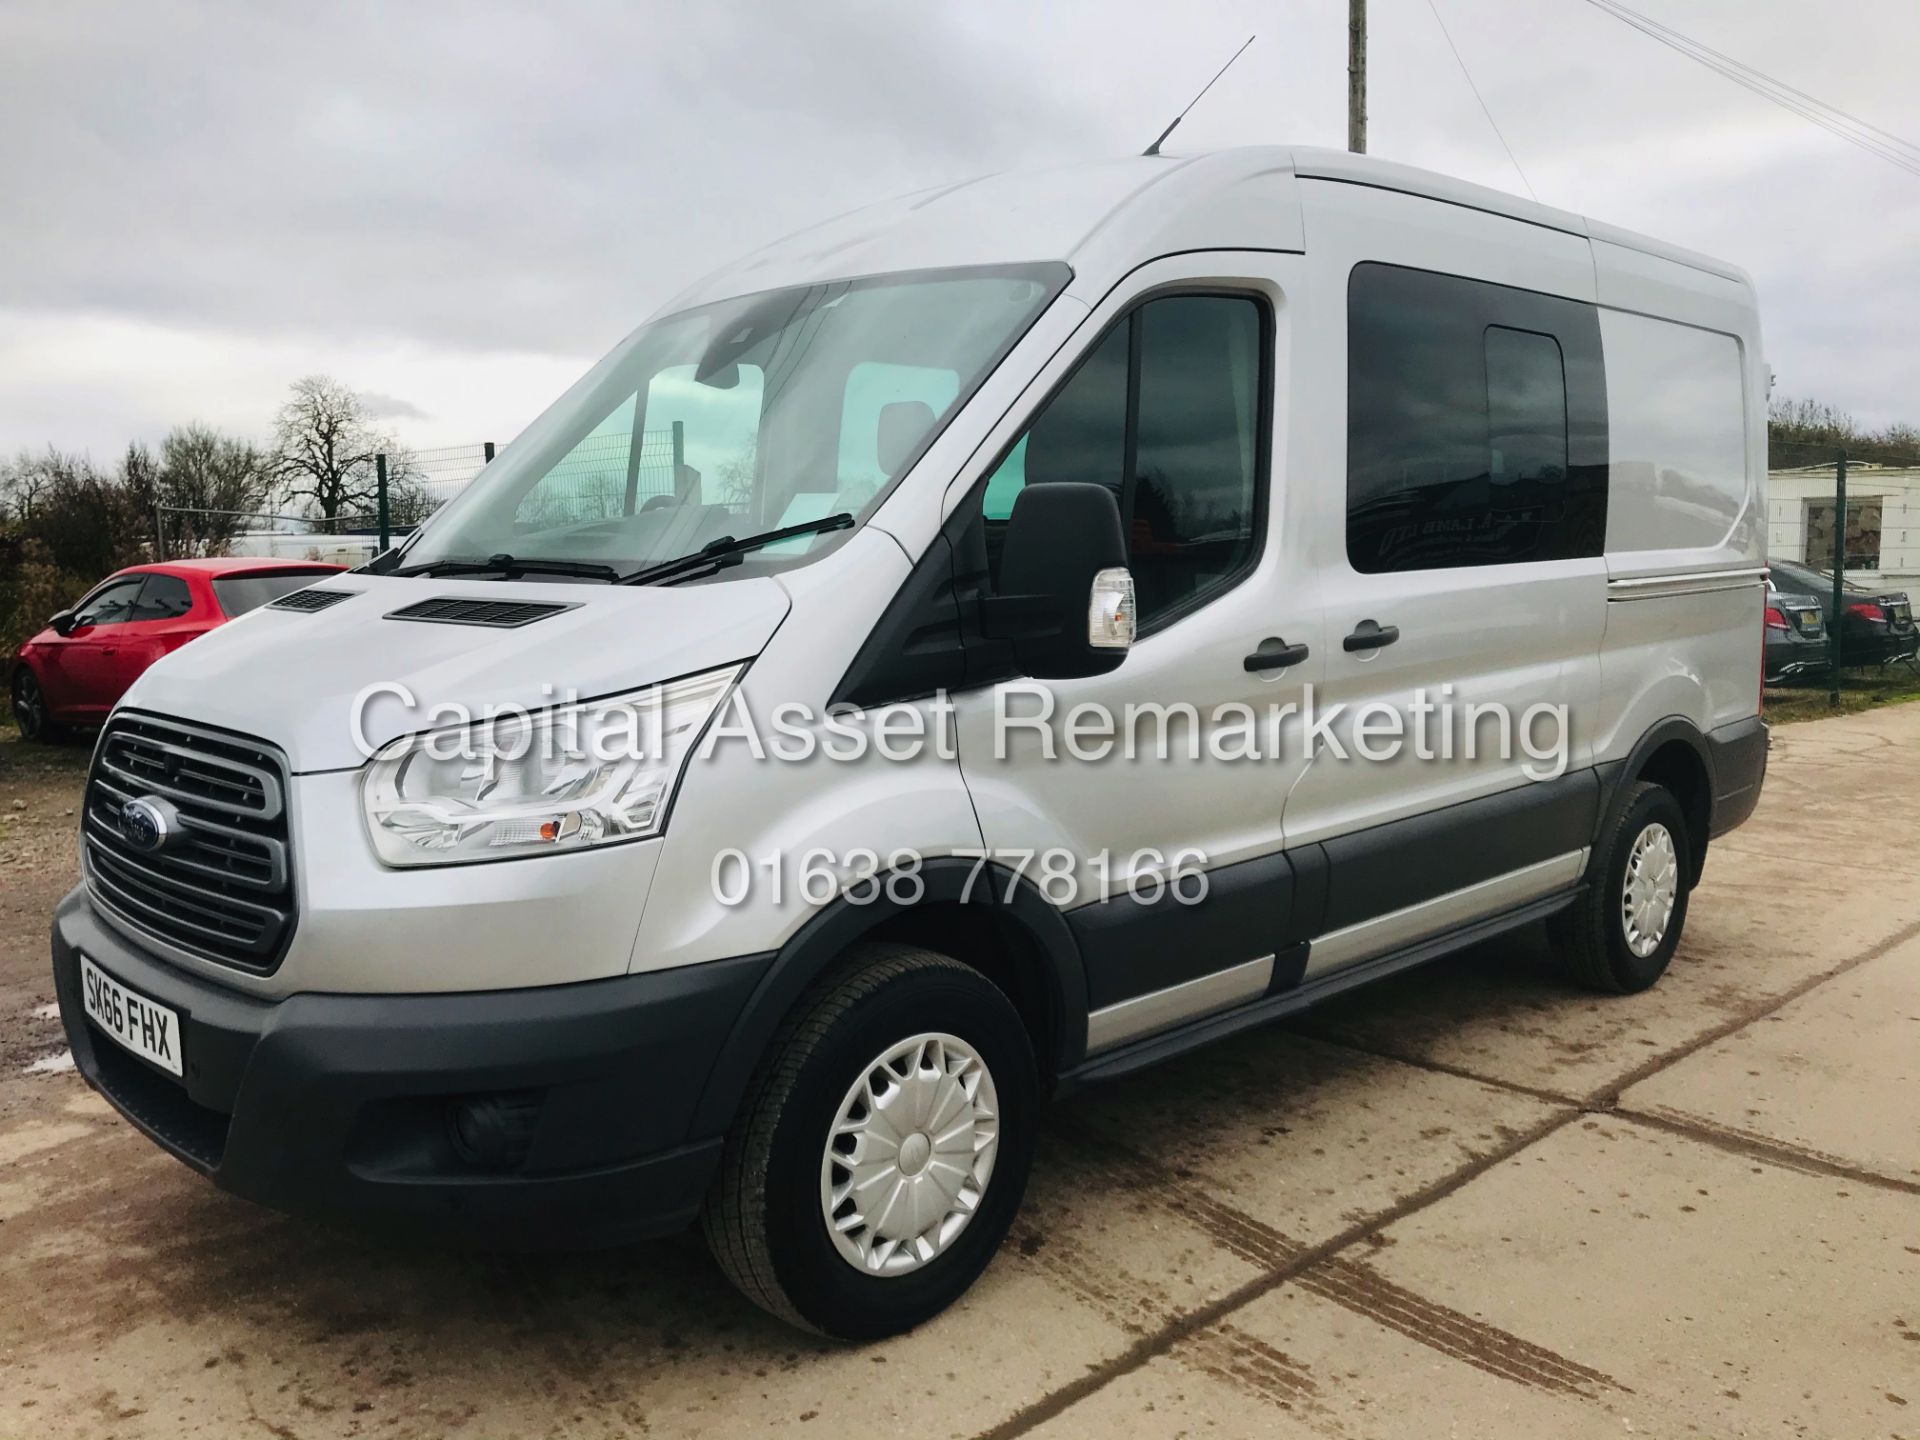 ON SALE FORD TRANSIT 2.2TDCI"TREND"L2H2 -1 OWNER FSH (2017 MODEL) AIR CON*EURO 6* 7 SEATER KOMBI VAN - Image 3 of 20